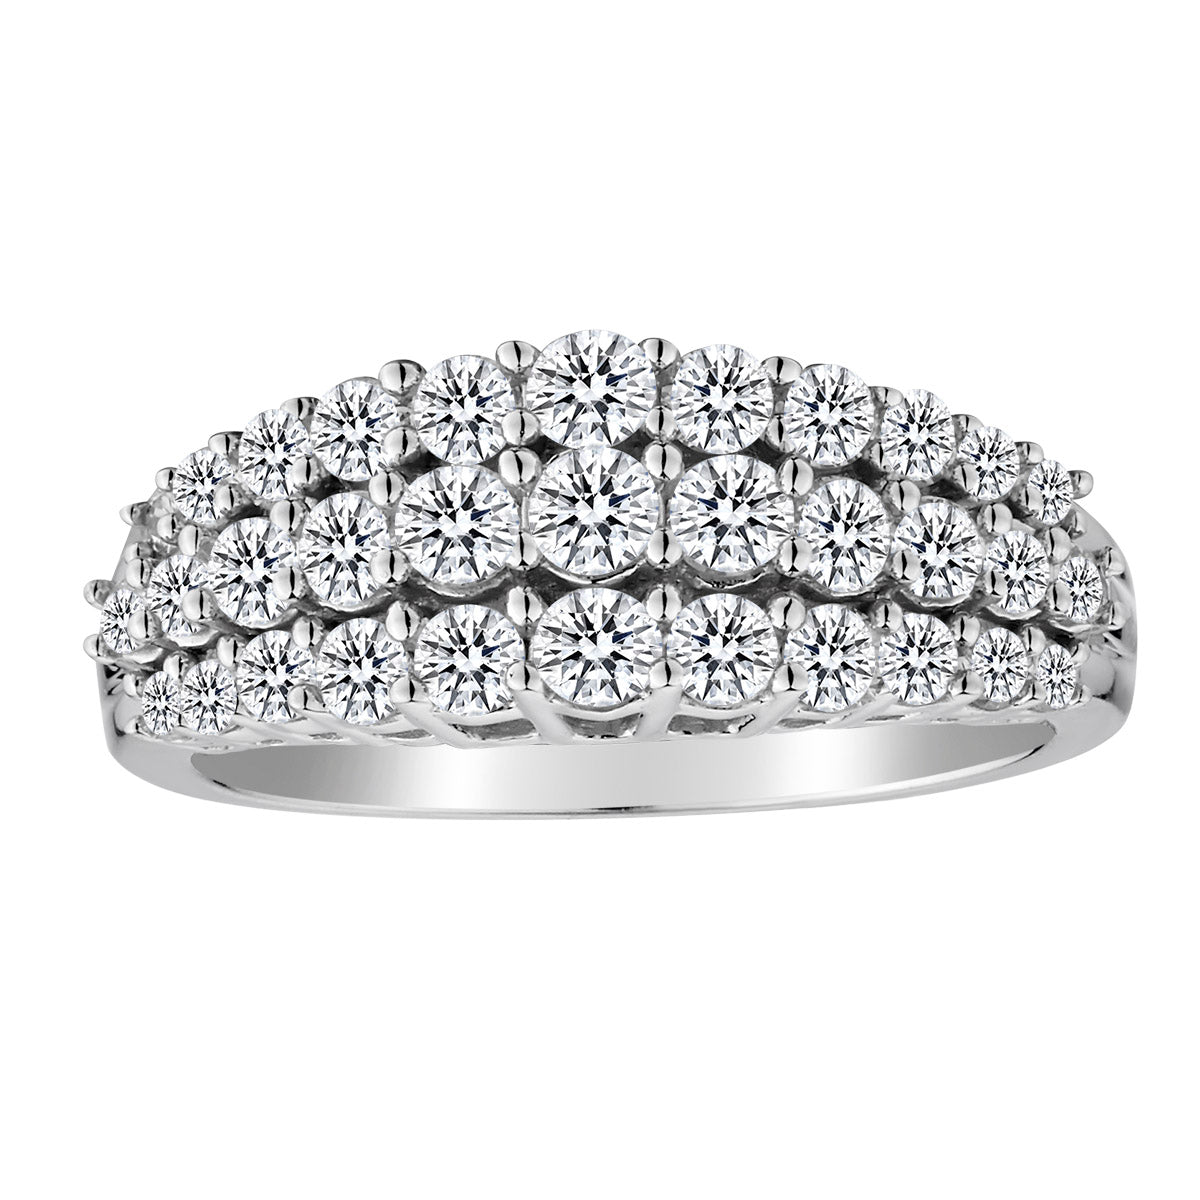 1.00 Carat of Diamonds "Stairway to Heaven" Ring, 10kt White Gold......................NOW